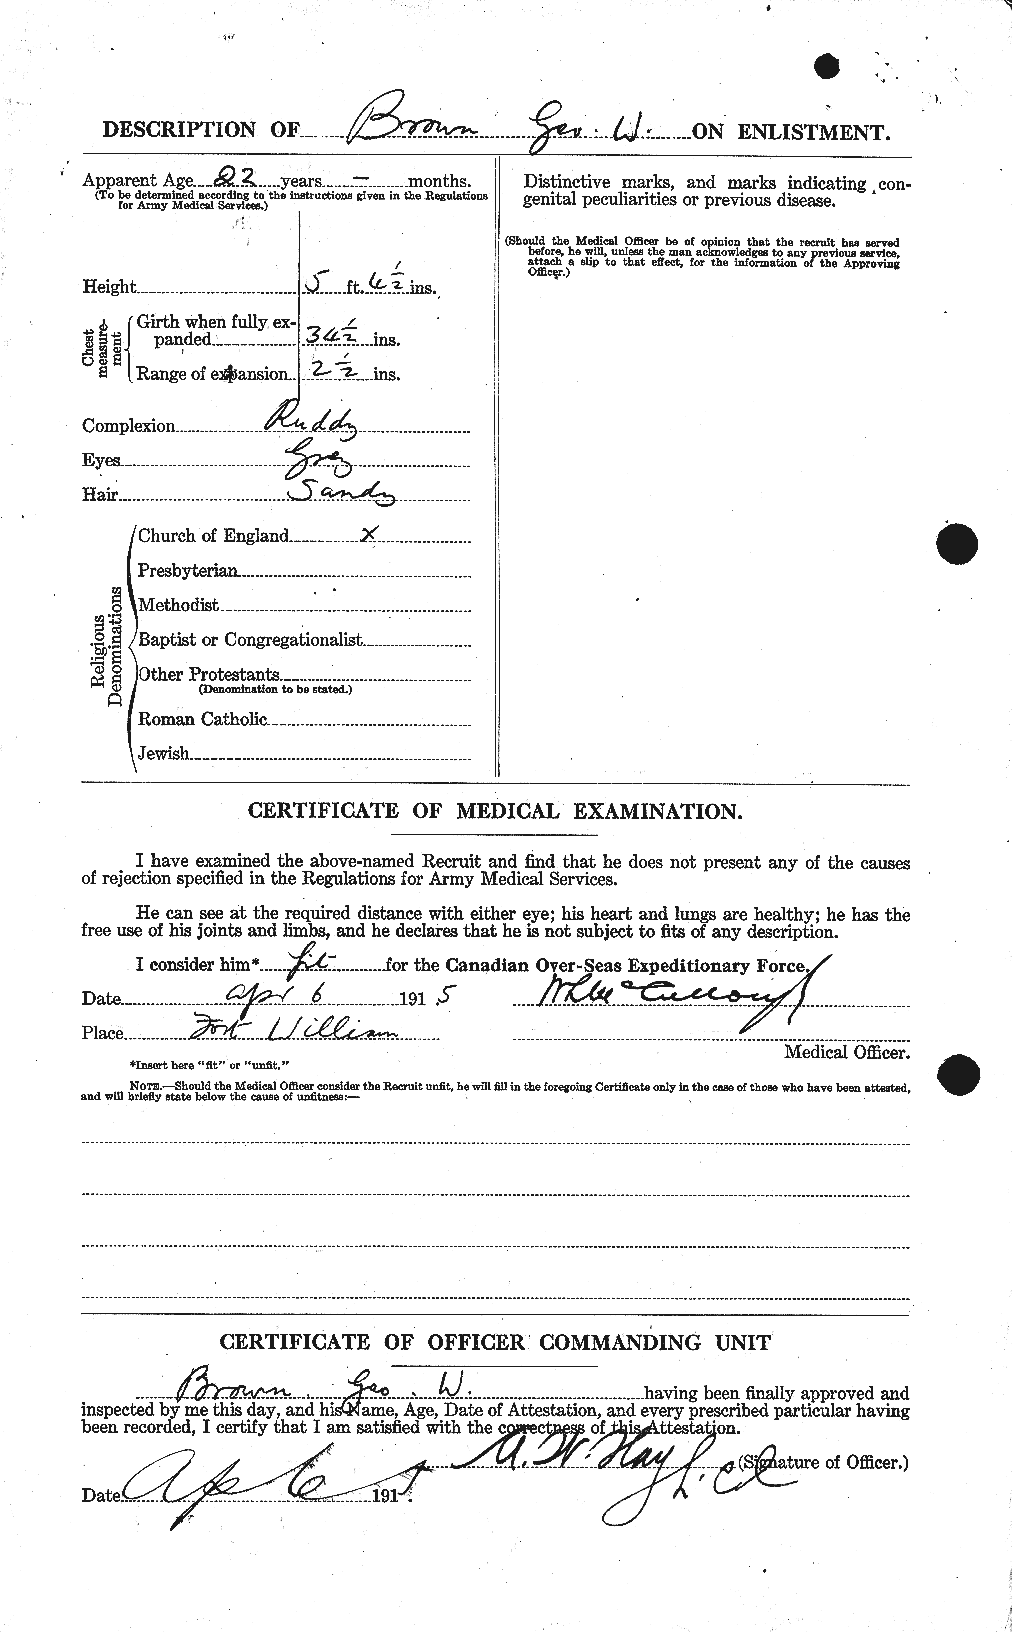 Personnel Records of the First World War - CEF 262584b